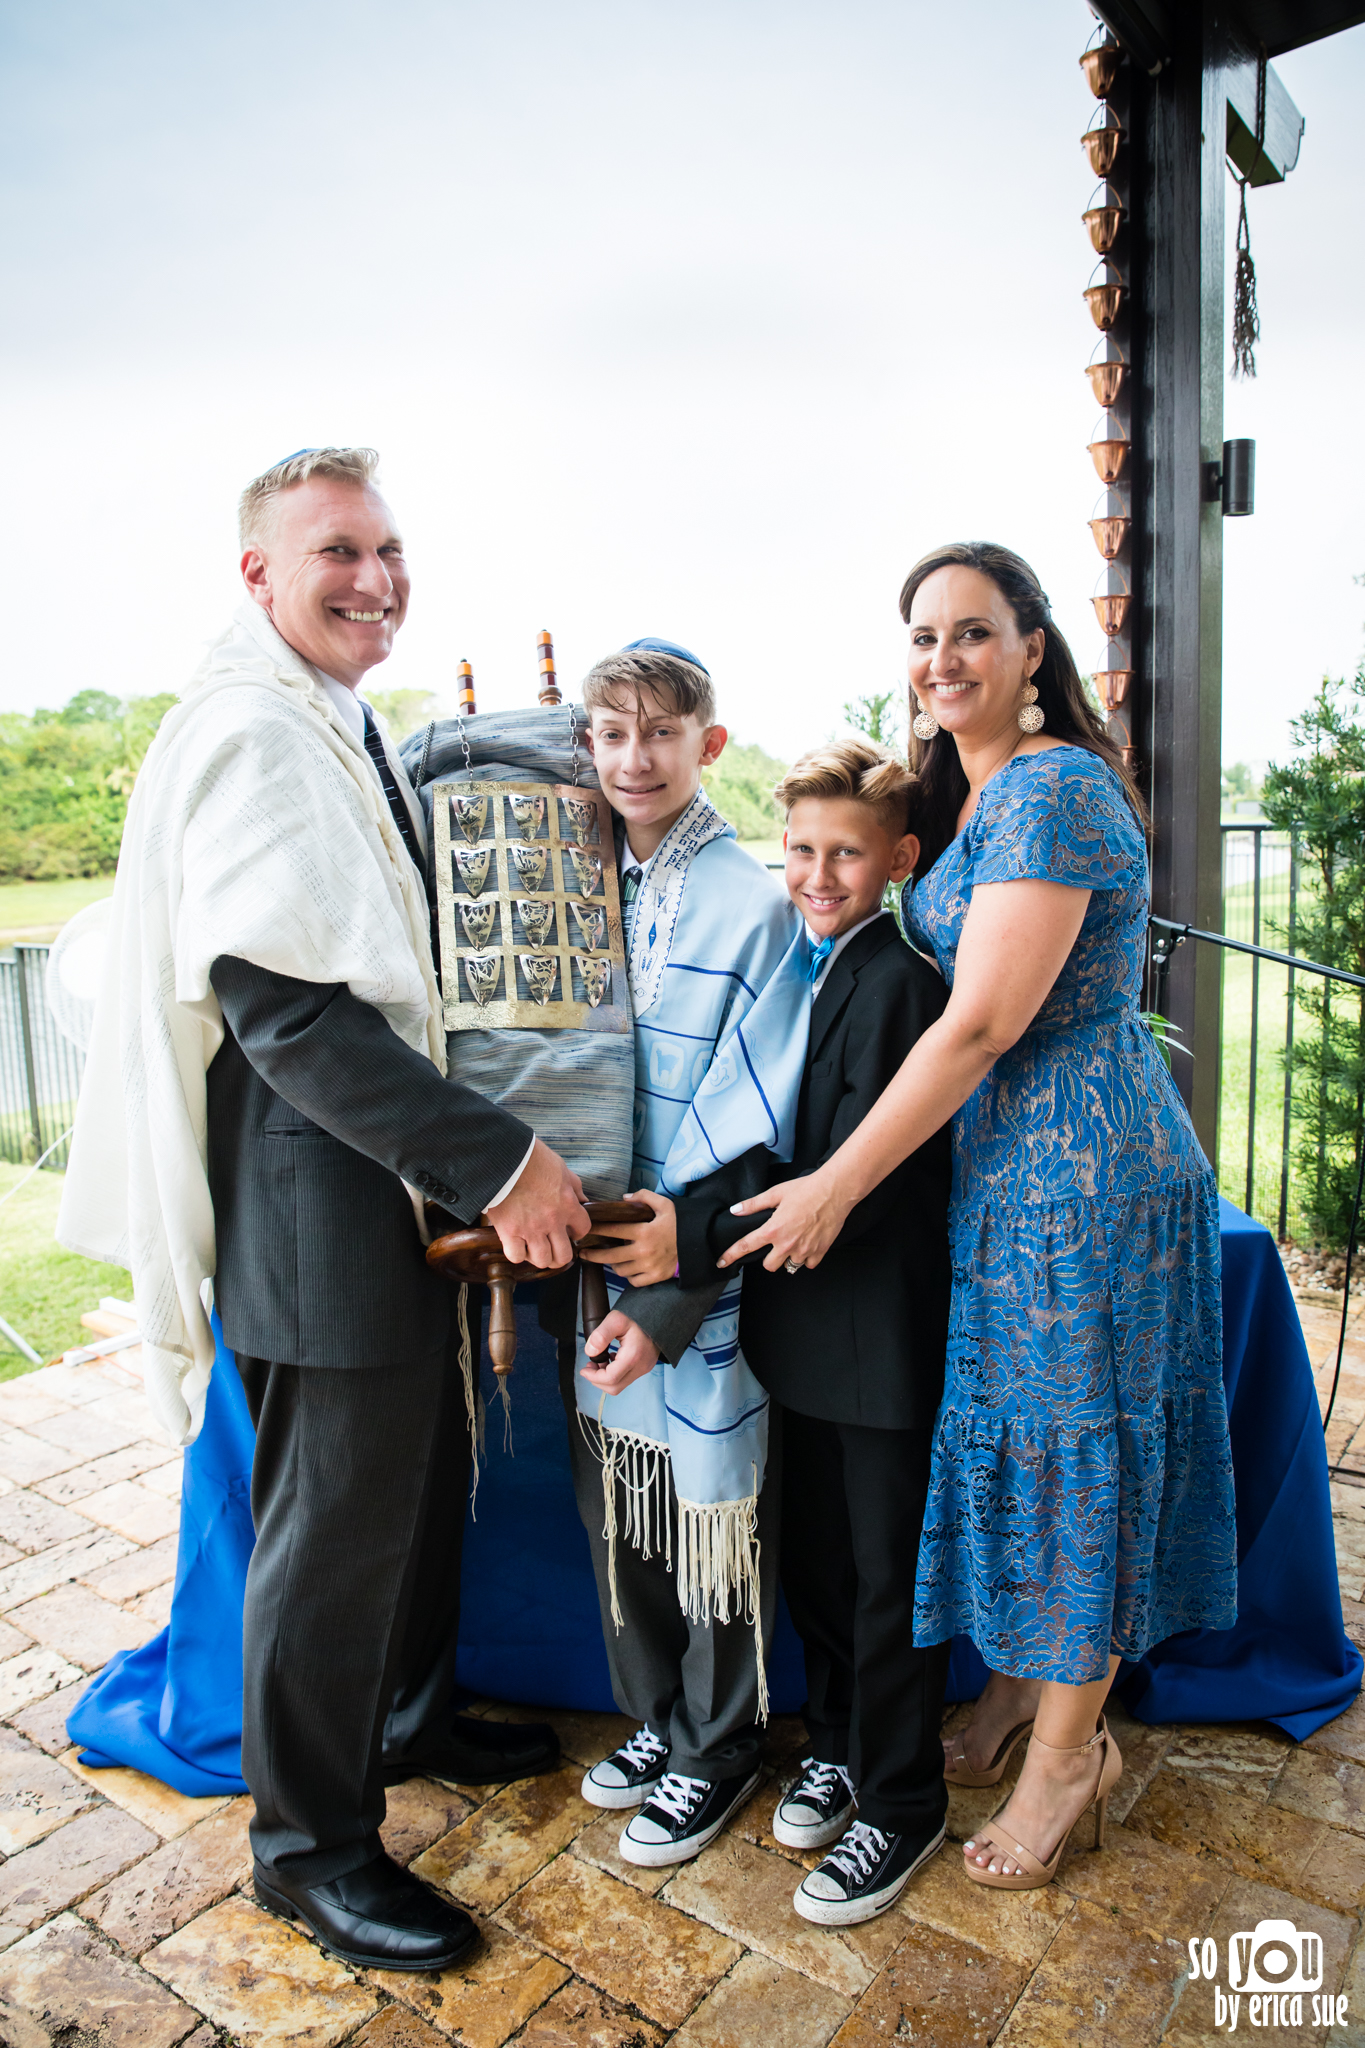 bar-mitzvah-photography-ft-lauderdale-so-you-by-erica-sue-7650.jpg